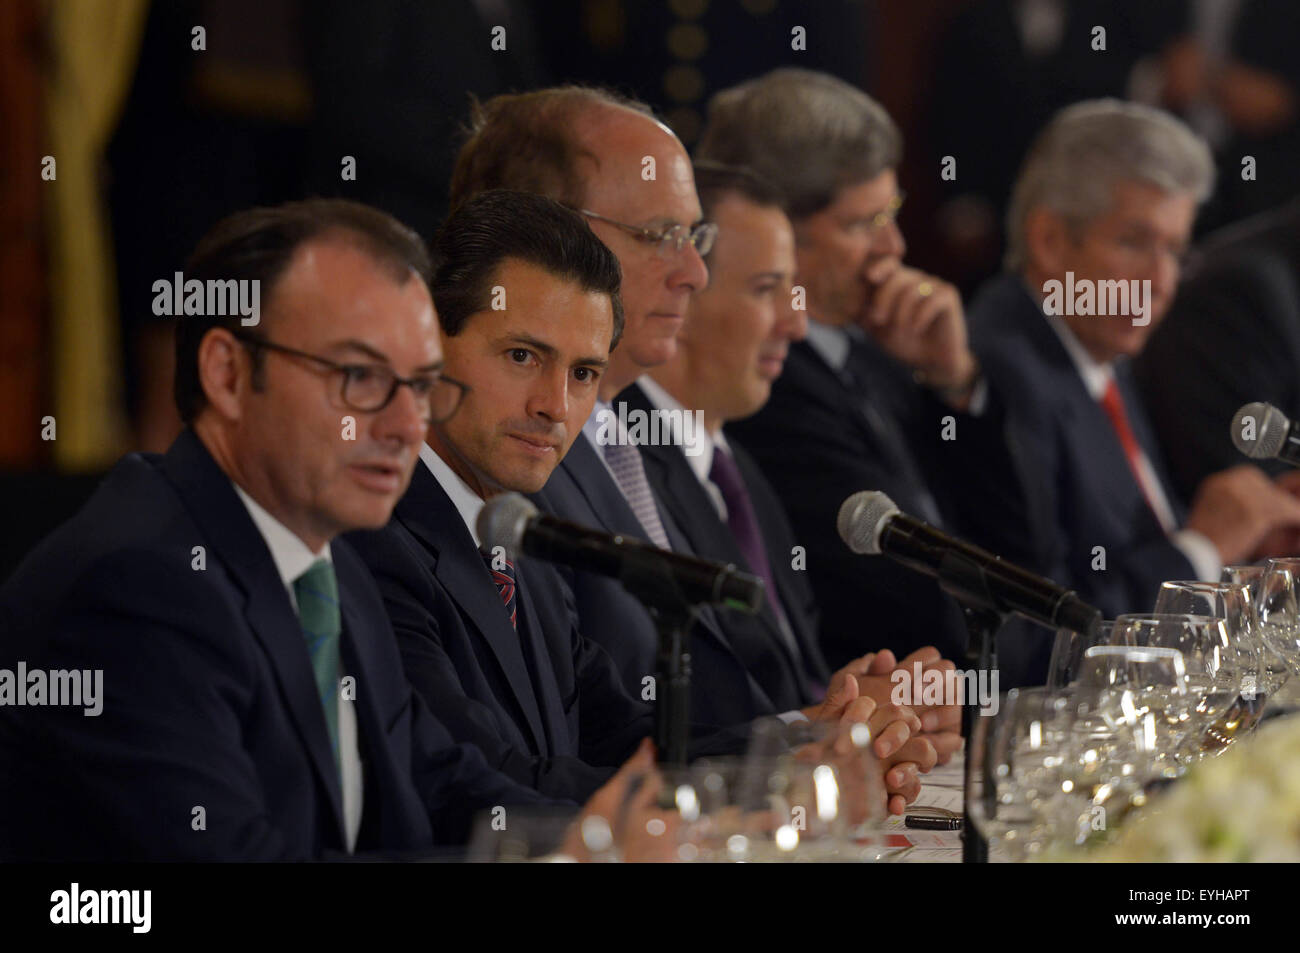 Mexico City, Mexico. 29th July, 2015. Image provided by Mexico's Presidency shows Mexican President Enrique Pena Nieto (2nd L) and Finance Minister Luis Videgaray (1st L) taking part in a dinner with members of the U.S. finance company BlackRock at the National Palace in Mexico City, capital of Mexico, on July 29, 2015. © Mexico's Presidency/Xinhua/Alamy Live News Stock Photo